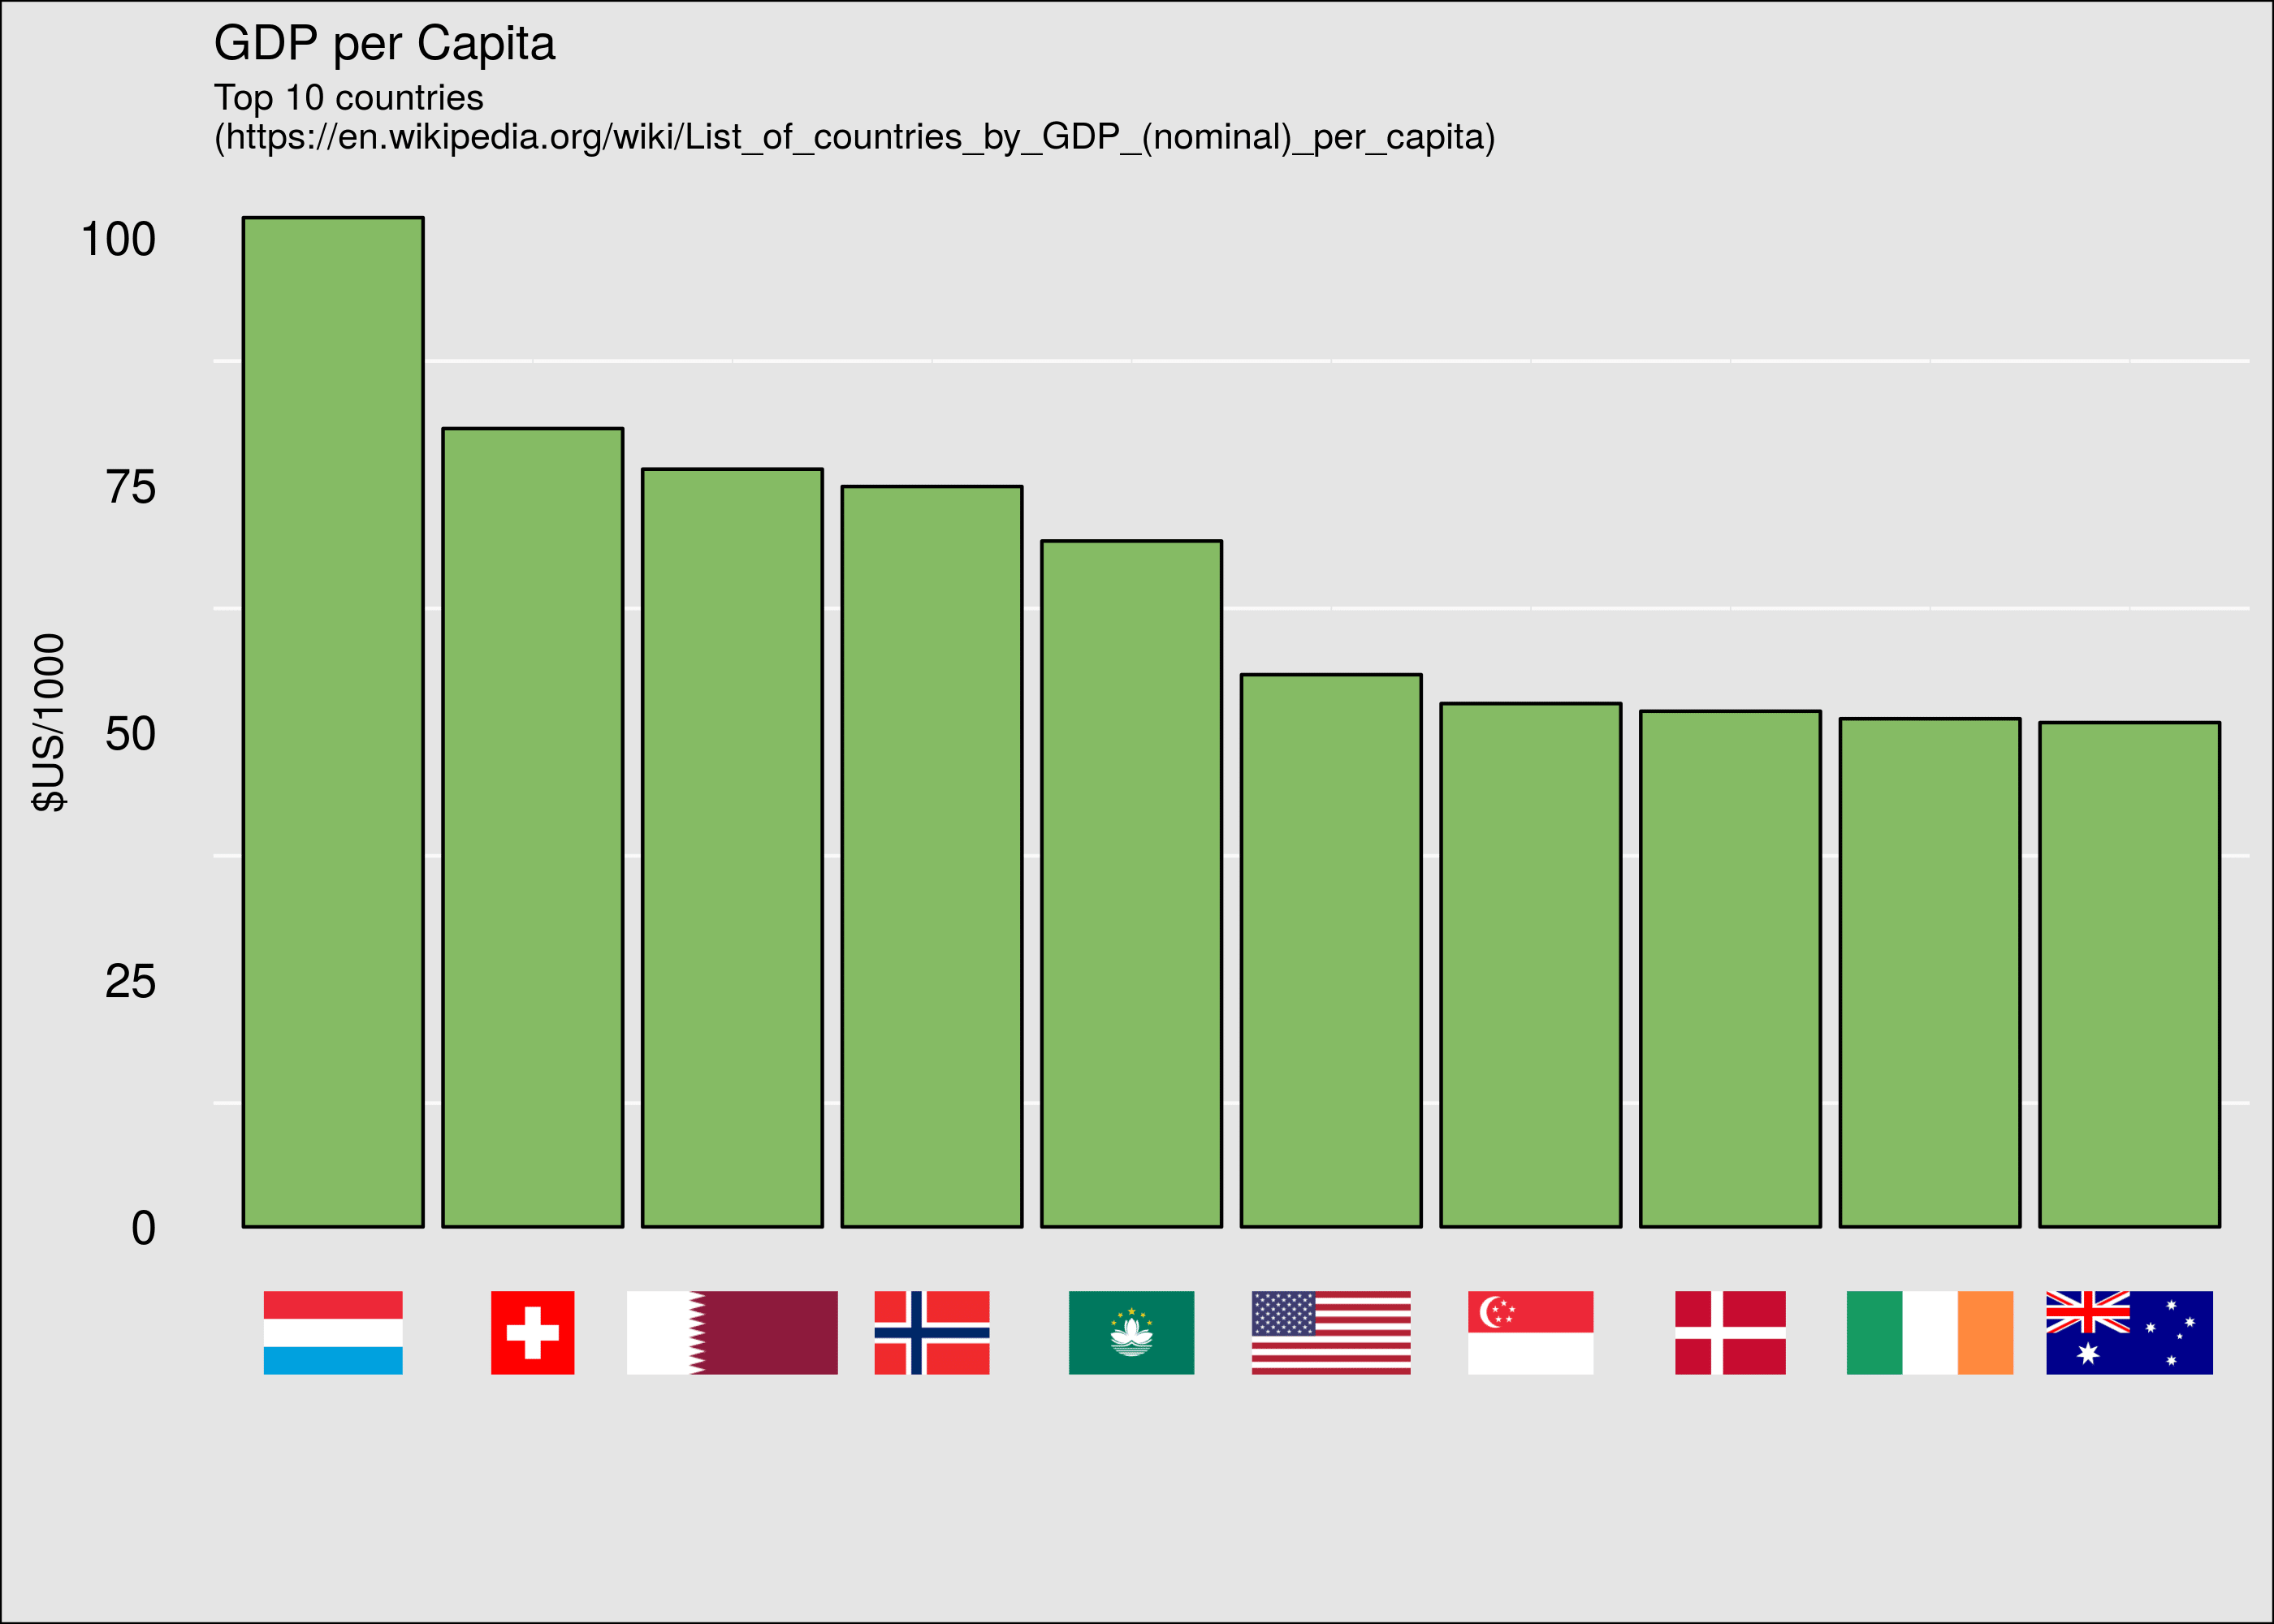 GDP per capita with flags for x-axis labels. This was harder to make than it seemed, but I’ve since added a little more flexibility to it.